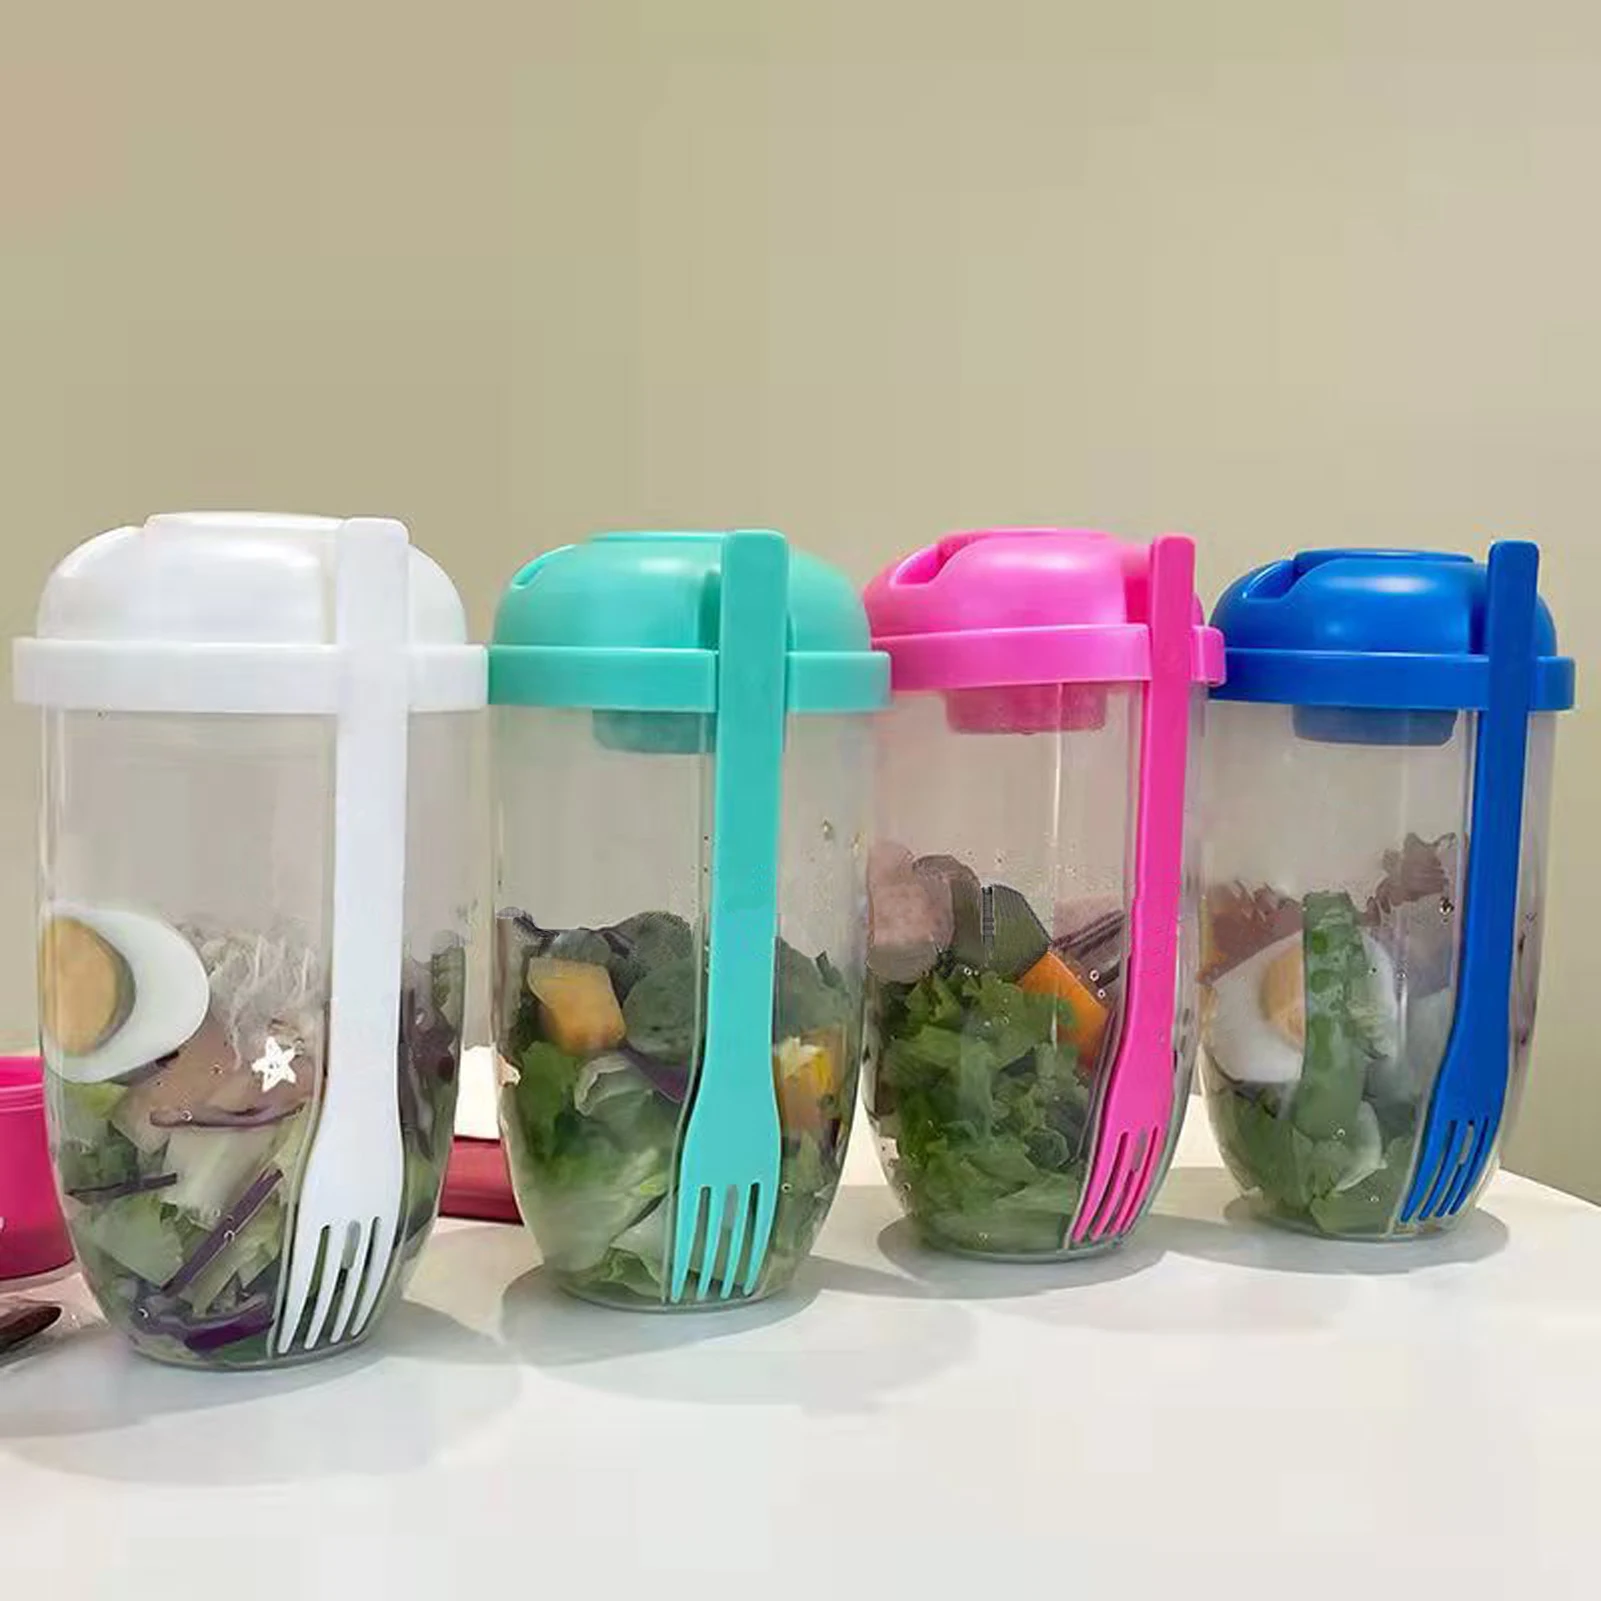 https://ae01.alicdn.com/kf/S911555986208442e8ce0f9caa8b711e8k/Lunch-Bento-Salad-Container-Cup-Set-With-Sauce-Cup-And-Fork-Transparent-Crisper-Cup-Shaped-Salad.jpg